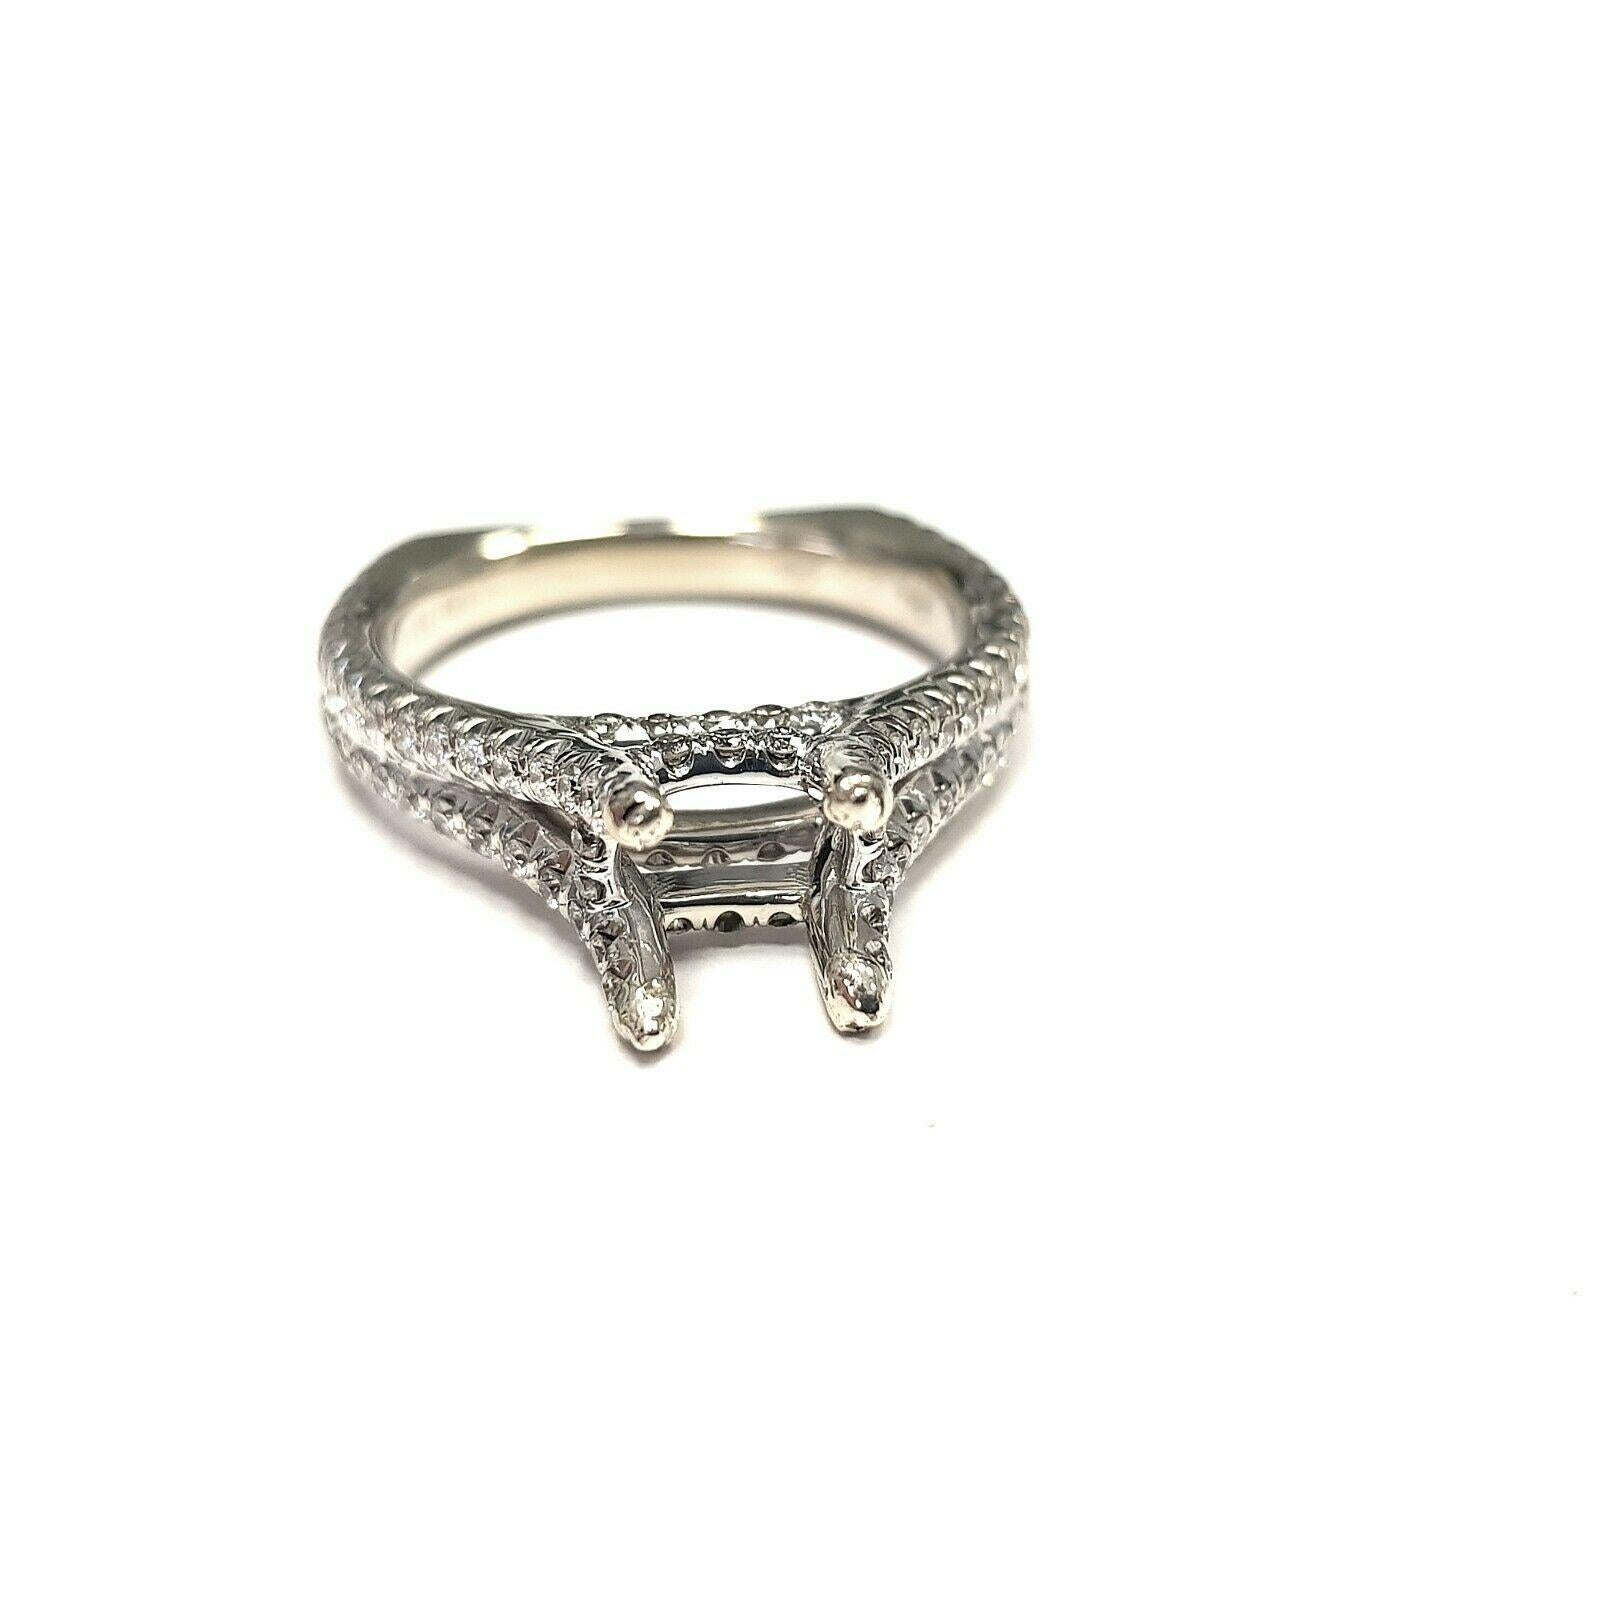  This is a white gold semi mounted ring with 92 melee diamonds, nicely made by MICHAEL M brand. You can use any gem 6.1-6.2mm as a center stone (ask us for the nice diamond or color stone- we are wholesale company, we have lots of gems). The current